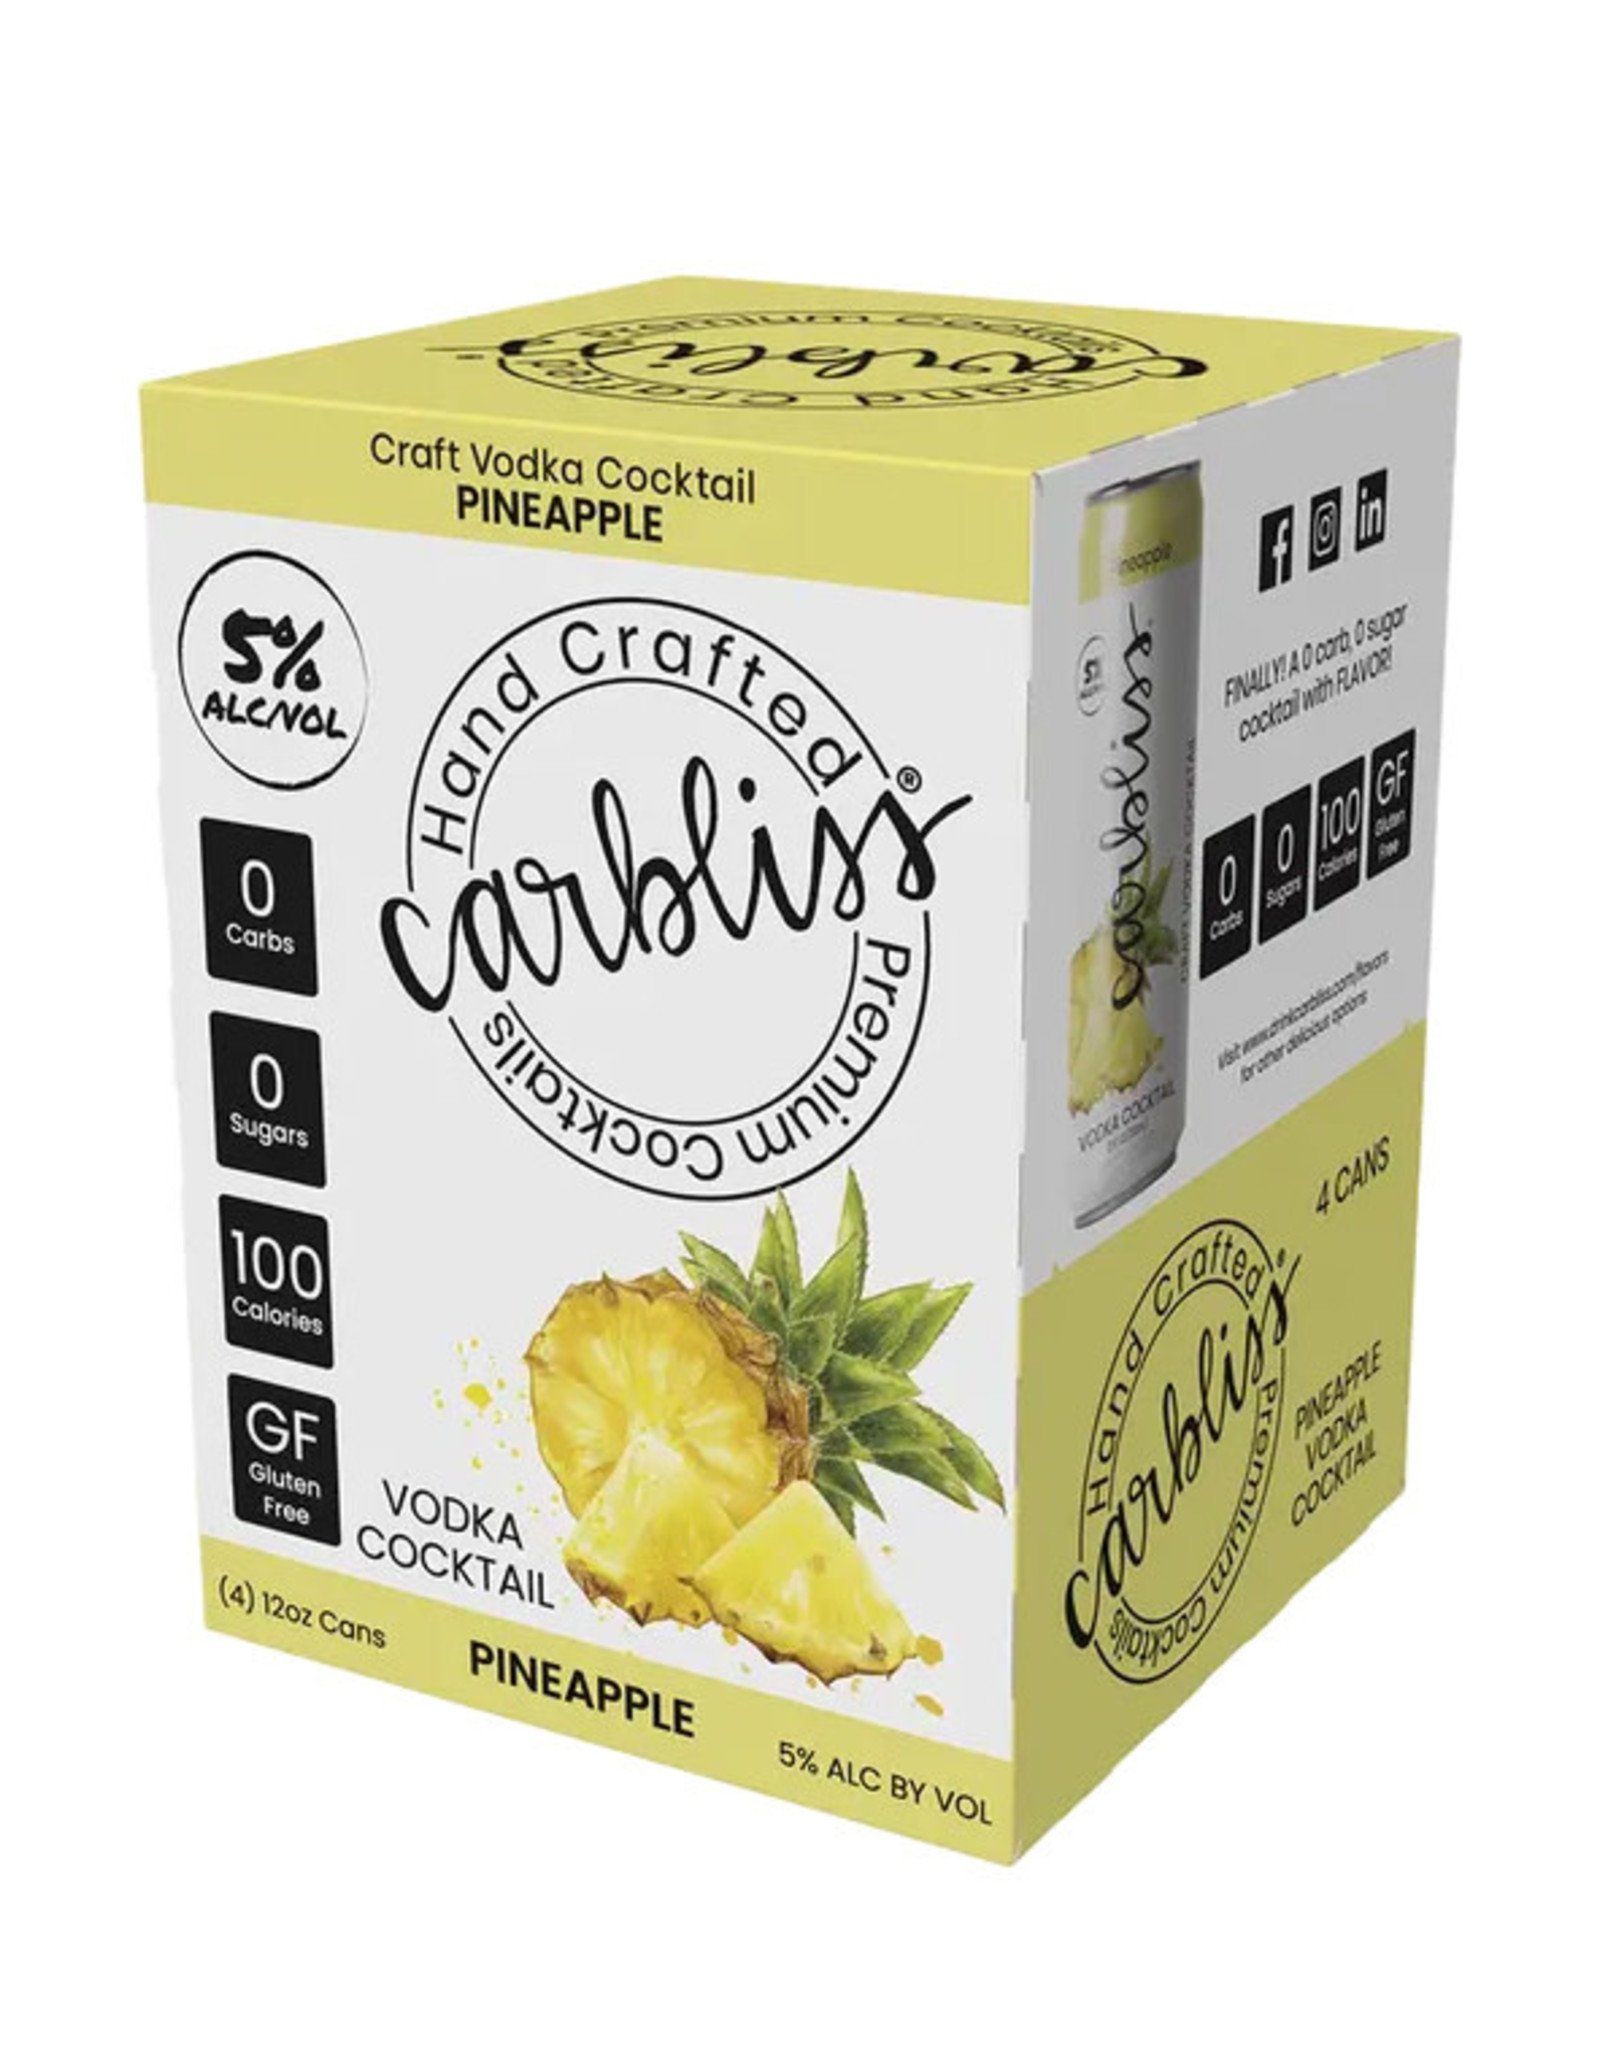 Carbliss Pineapple 4 Pk Cans